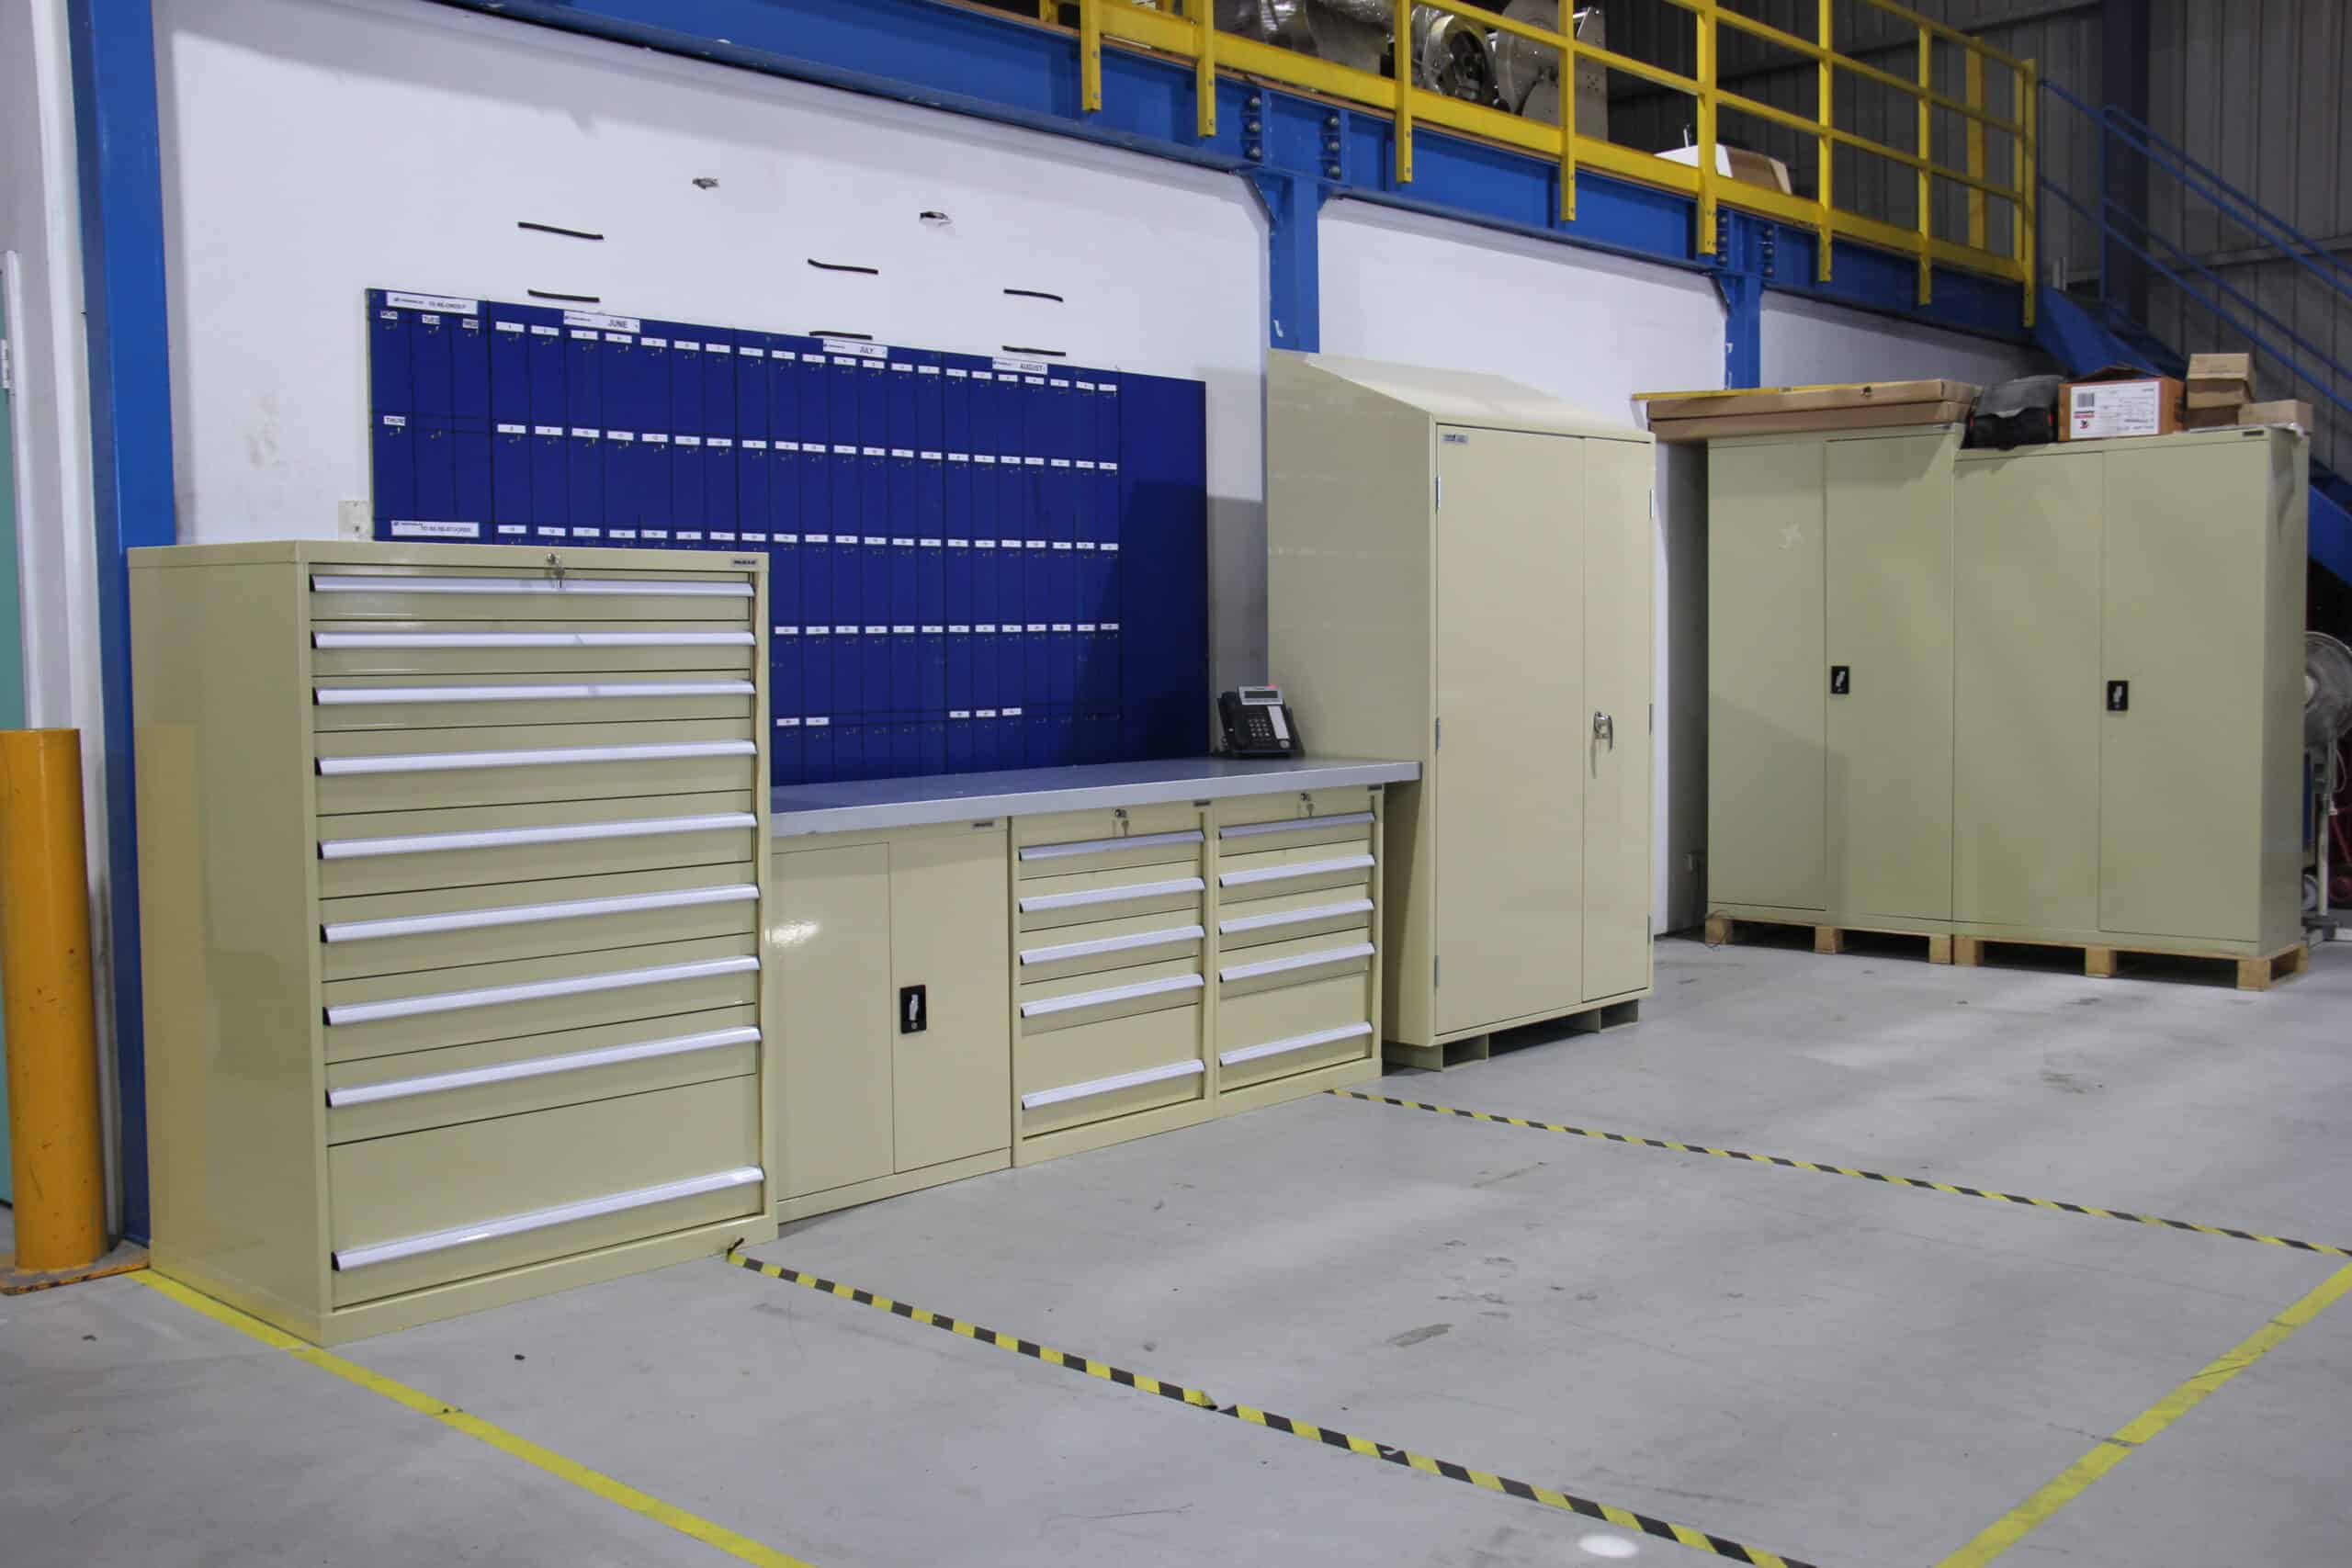 Make the most of your warehouse space with high-density storage